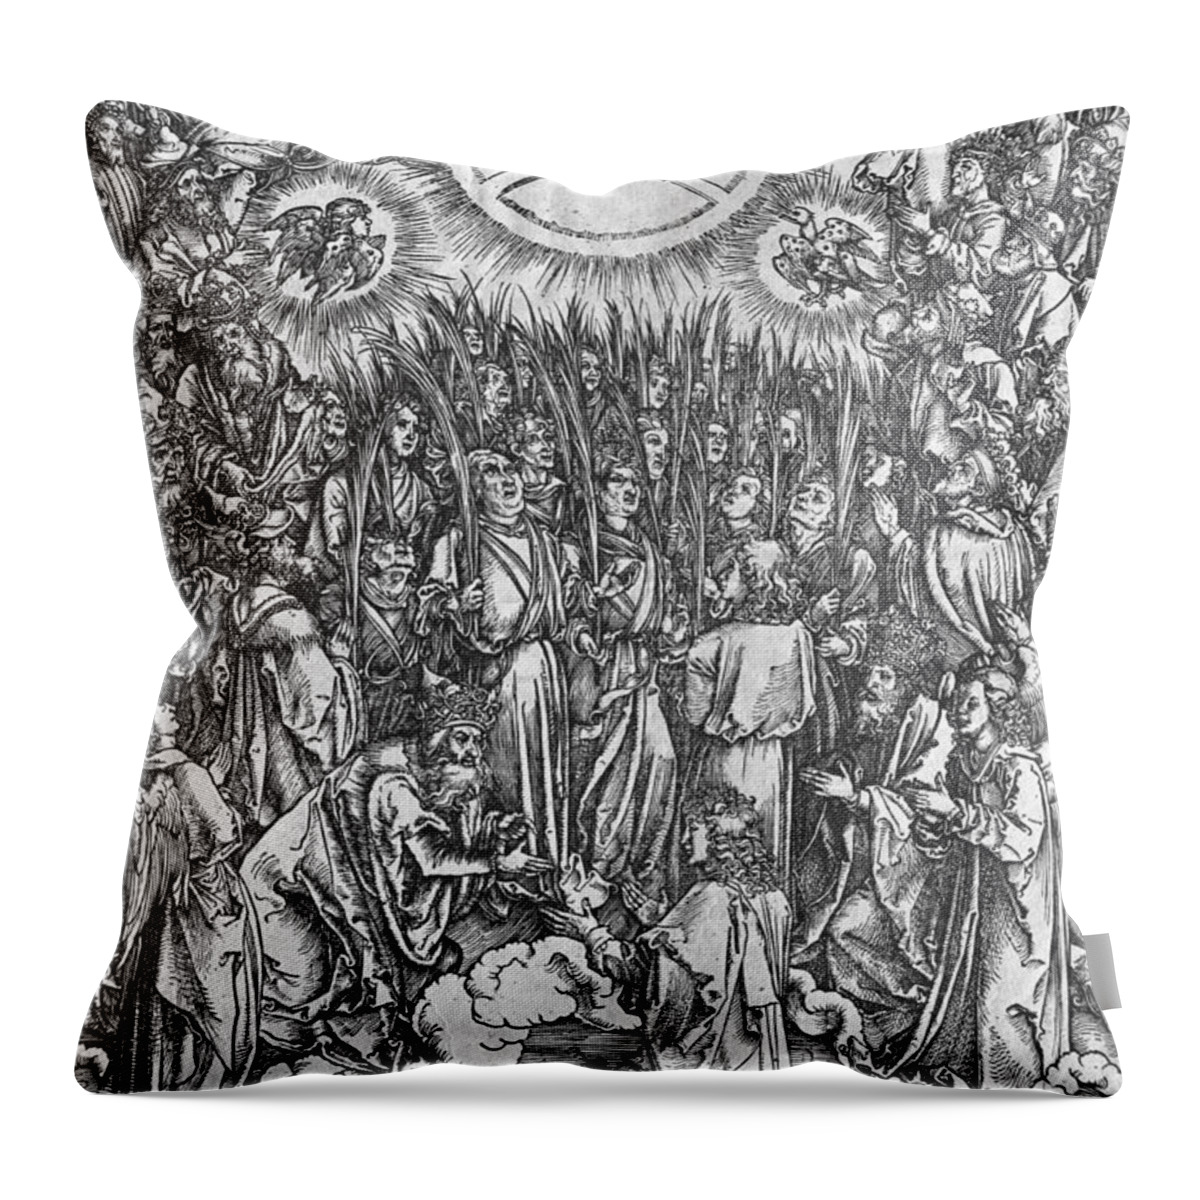 Scene From The Apocalypse Throw Pillow featuring the painting Adoration of the Lamb by Albrecht Durer